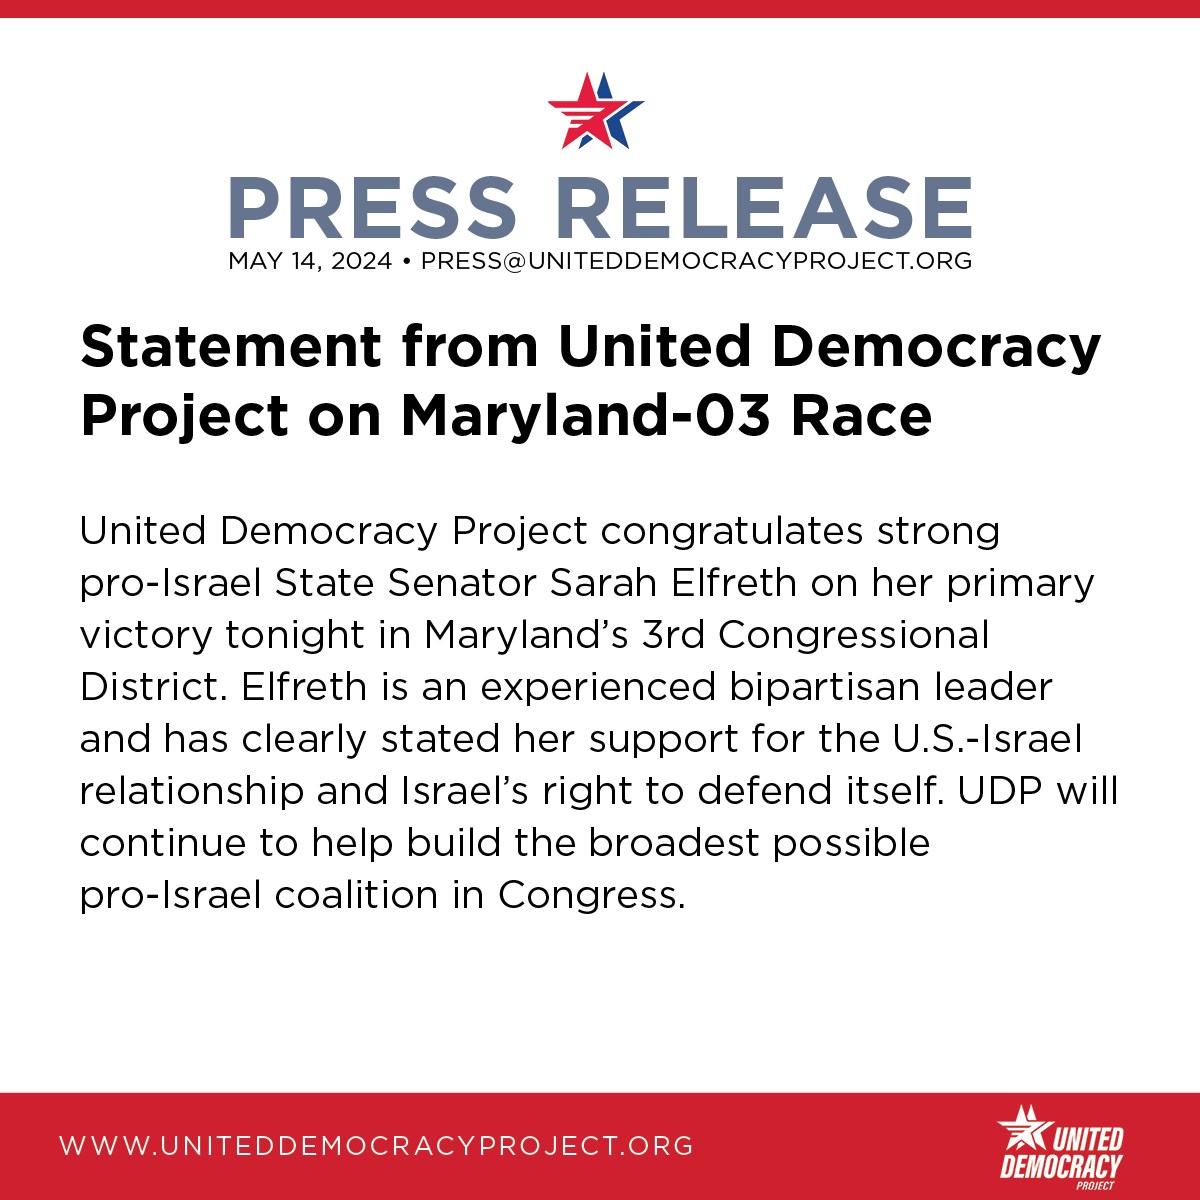 United Democracy Project congratulates strong pro-Israel State Senator Sarah Elfreth on her primary victory tonight in Maryland’s 3rd Congressional District.